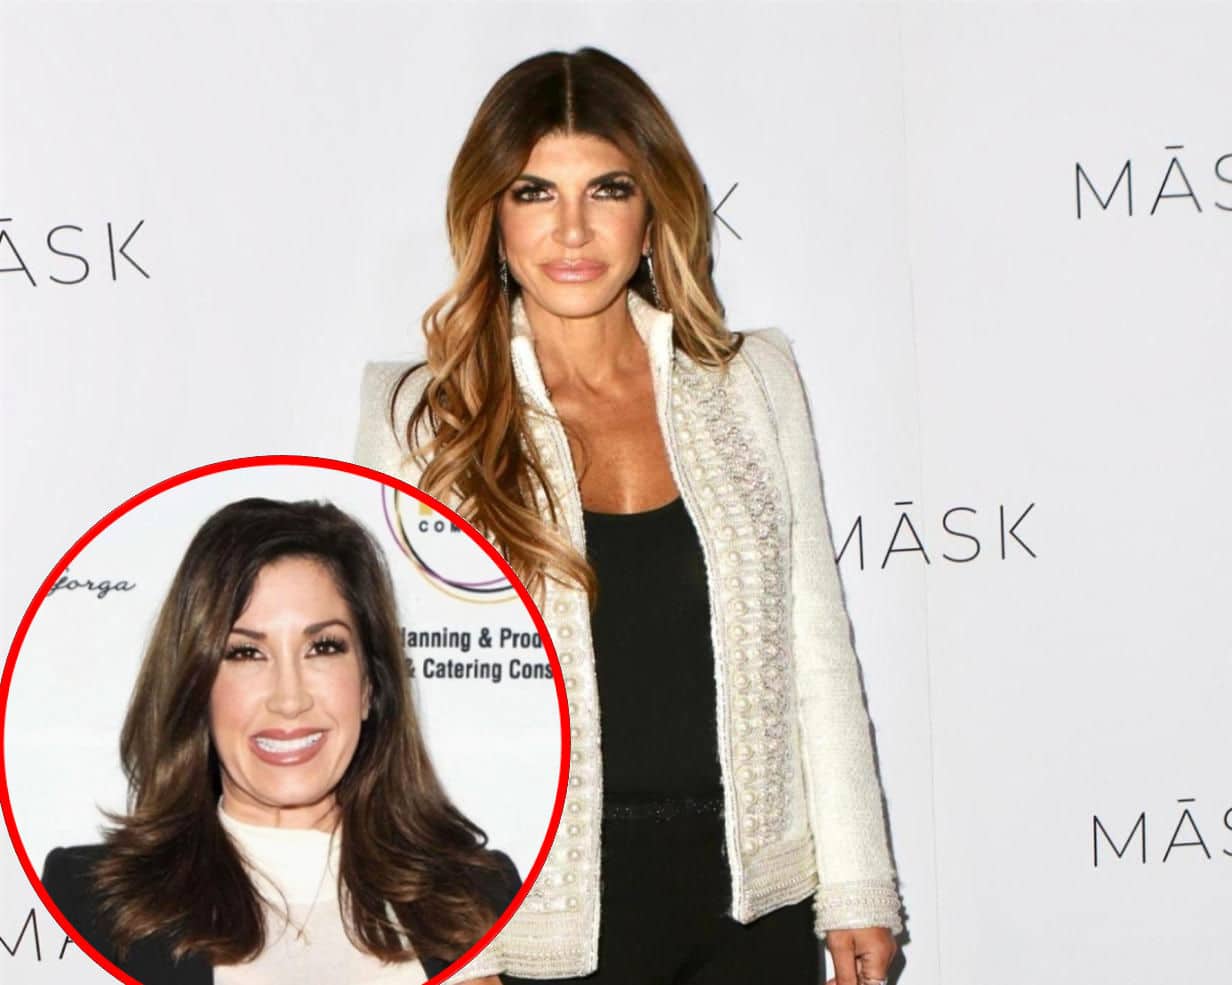 Teresa Giudice on When She'll Quit RHONJ, If She's Open to Rekindling Friendship With Jacqueline Laurita, and Her Dream Cast